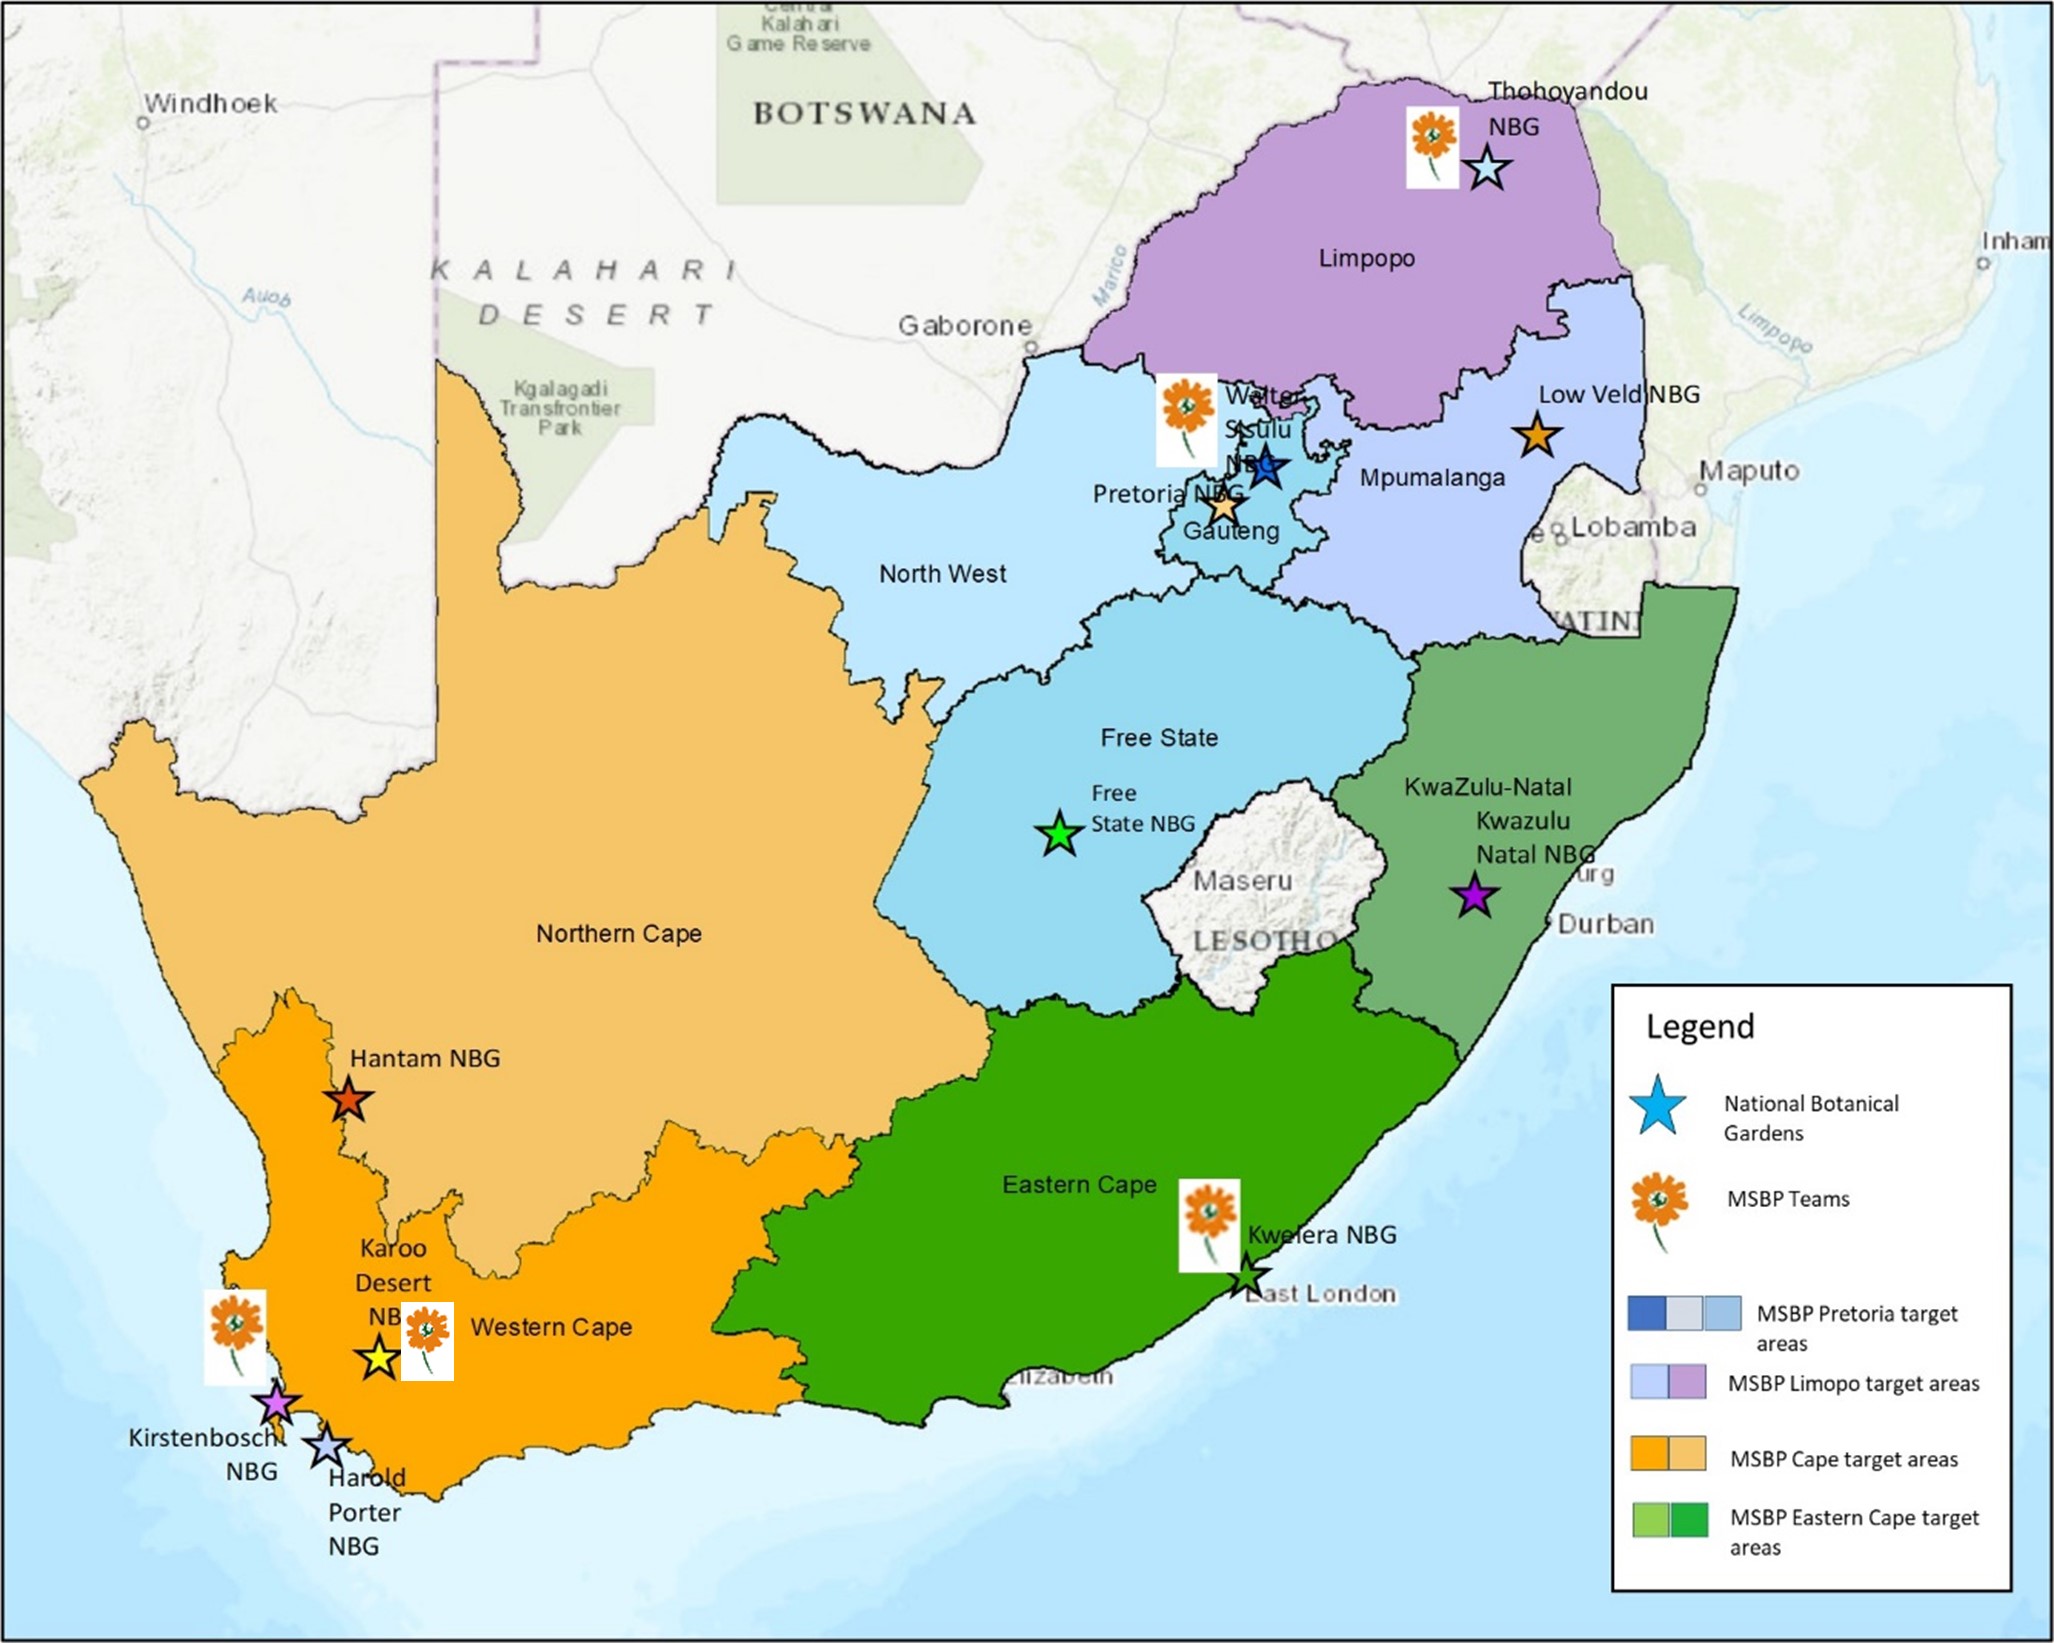 A map of South Africa highlighting the collecting areas covered by each of the MSBP teams, and their respective locations